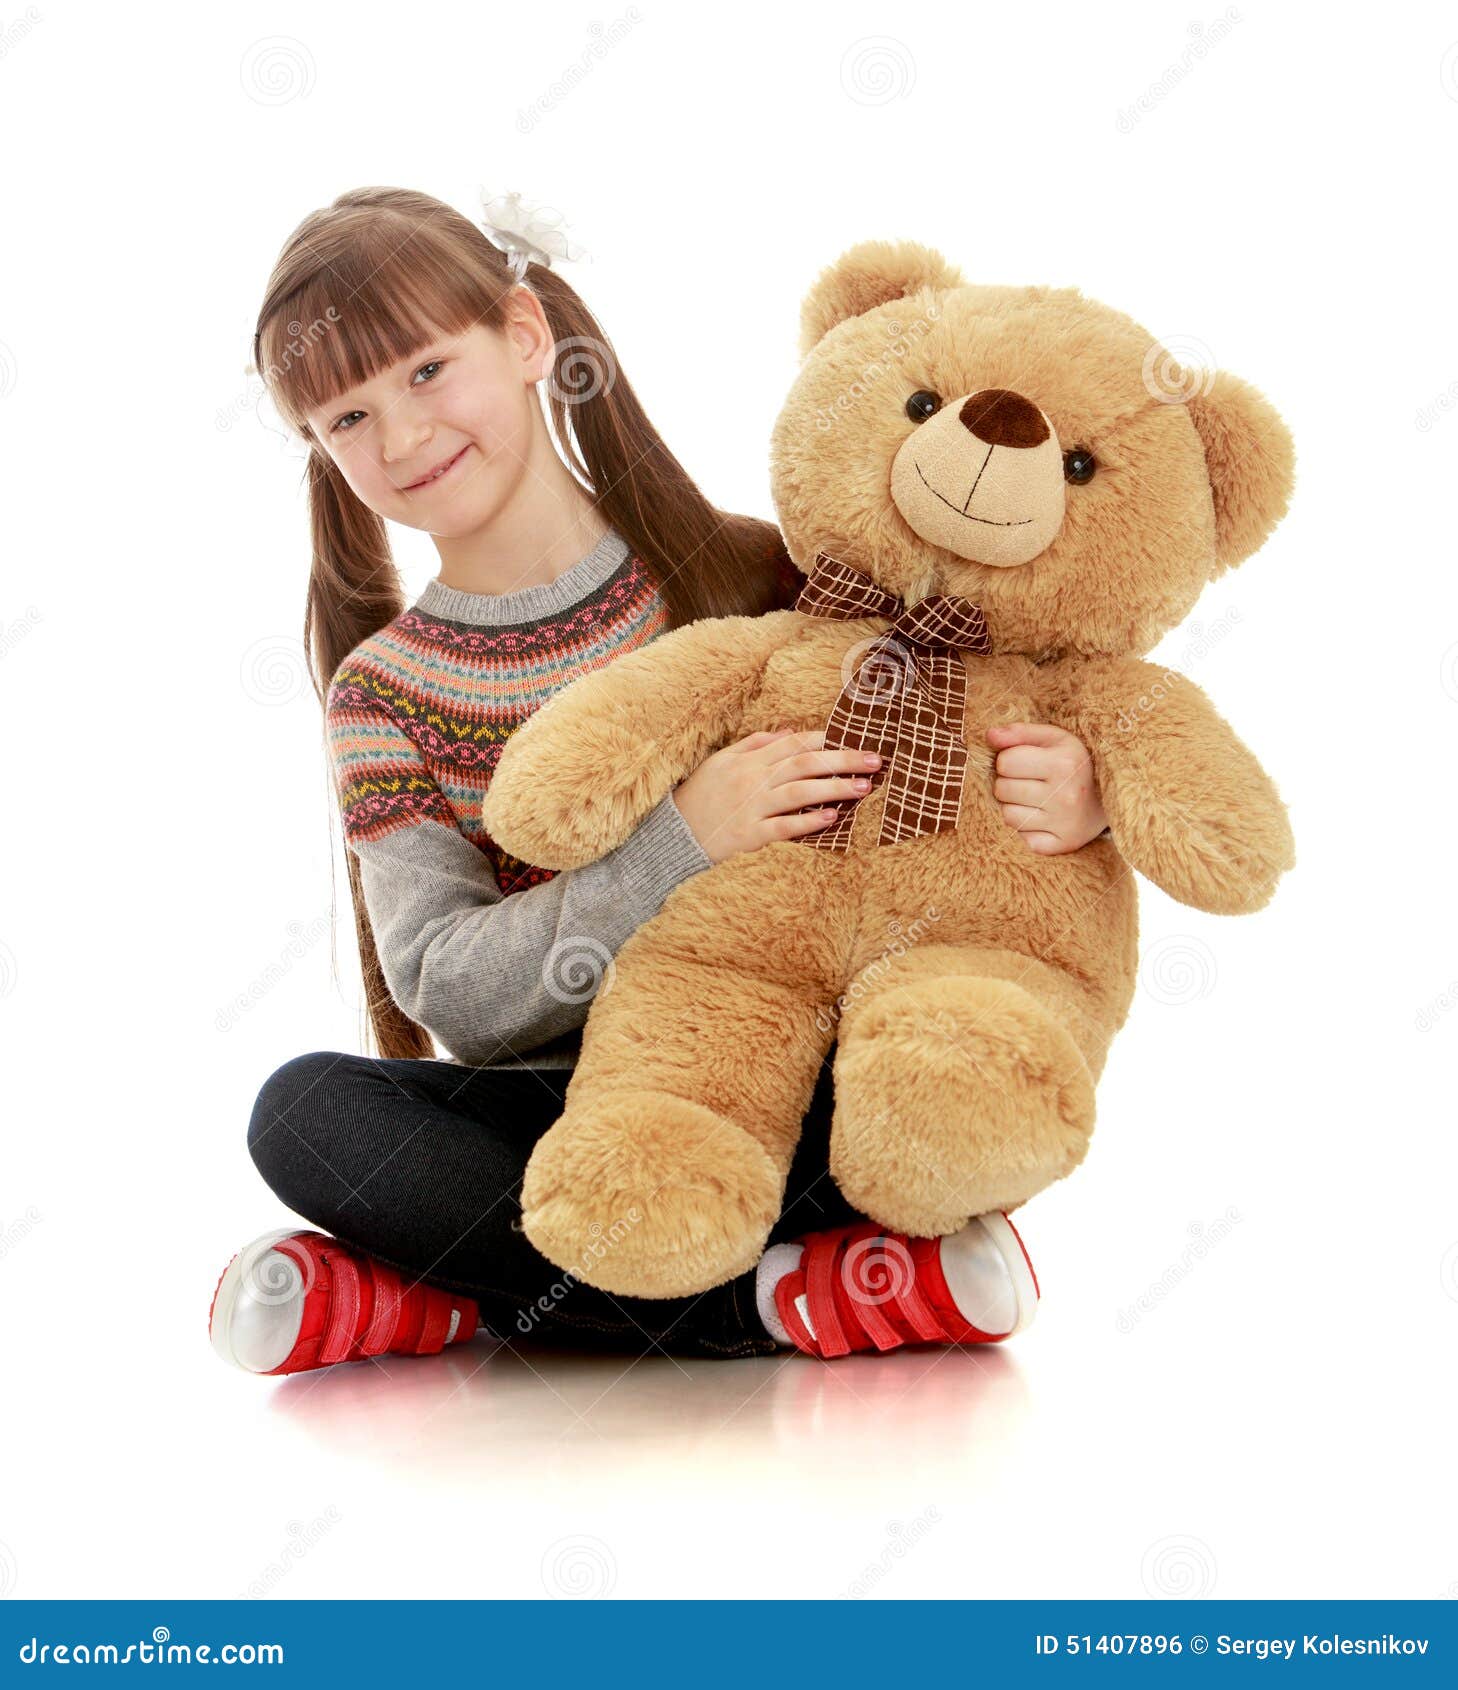 Smiling Girl Sitting on the Floor and Hugging Stock Photo - Image of ...